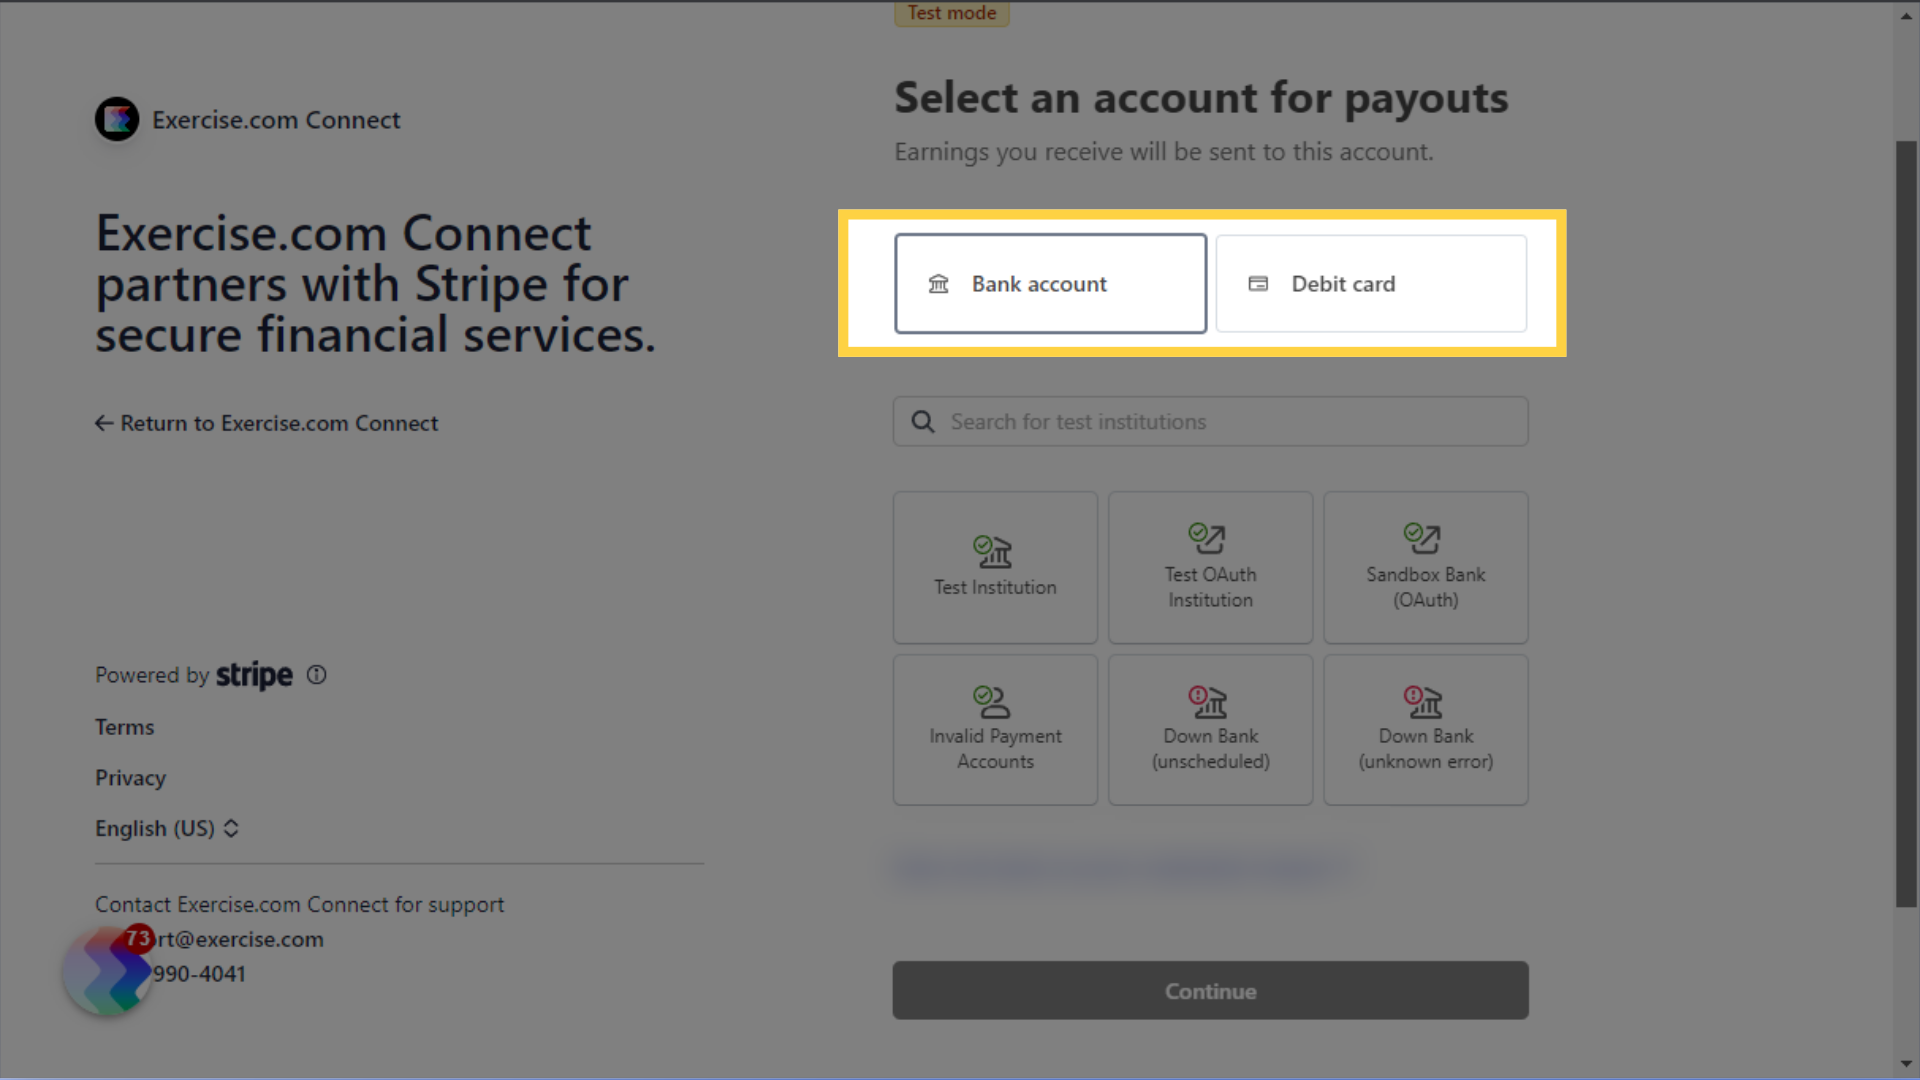 Connect the account where you want to receive payouts.